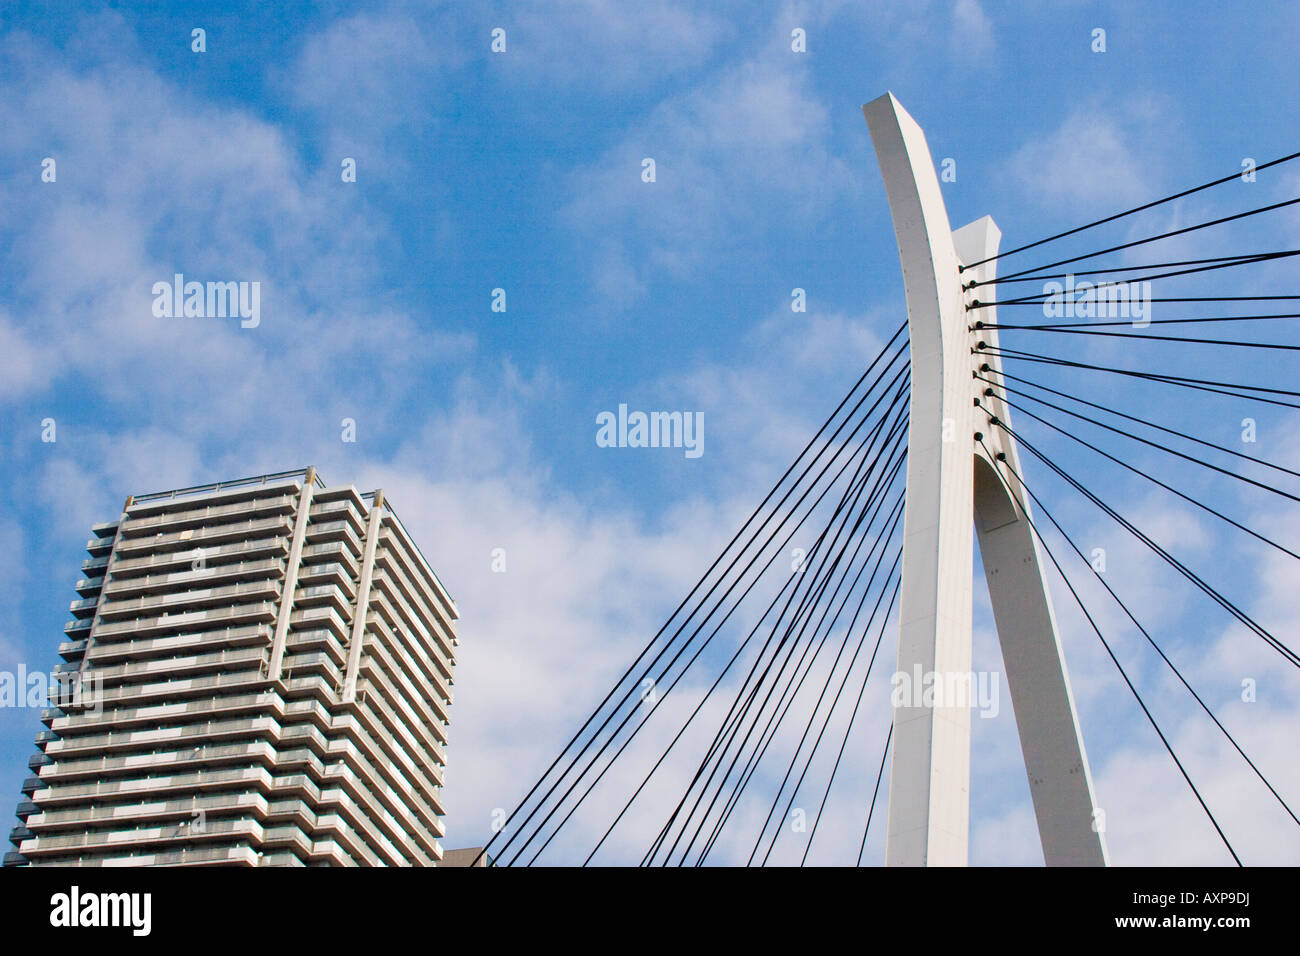 Single tower cable stayed bridge on the Sumida River in Tokyo Japan Stock Photo